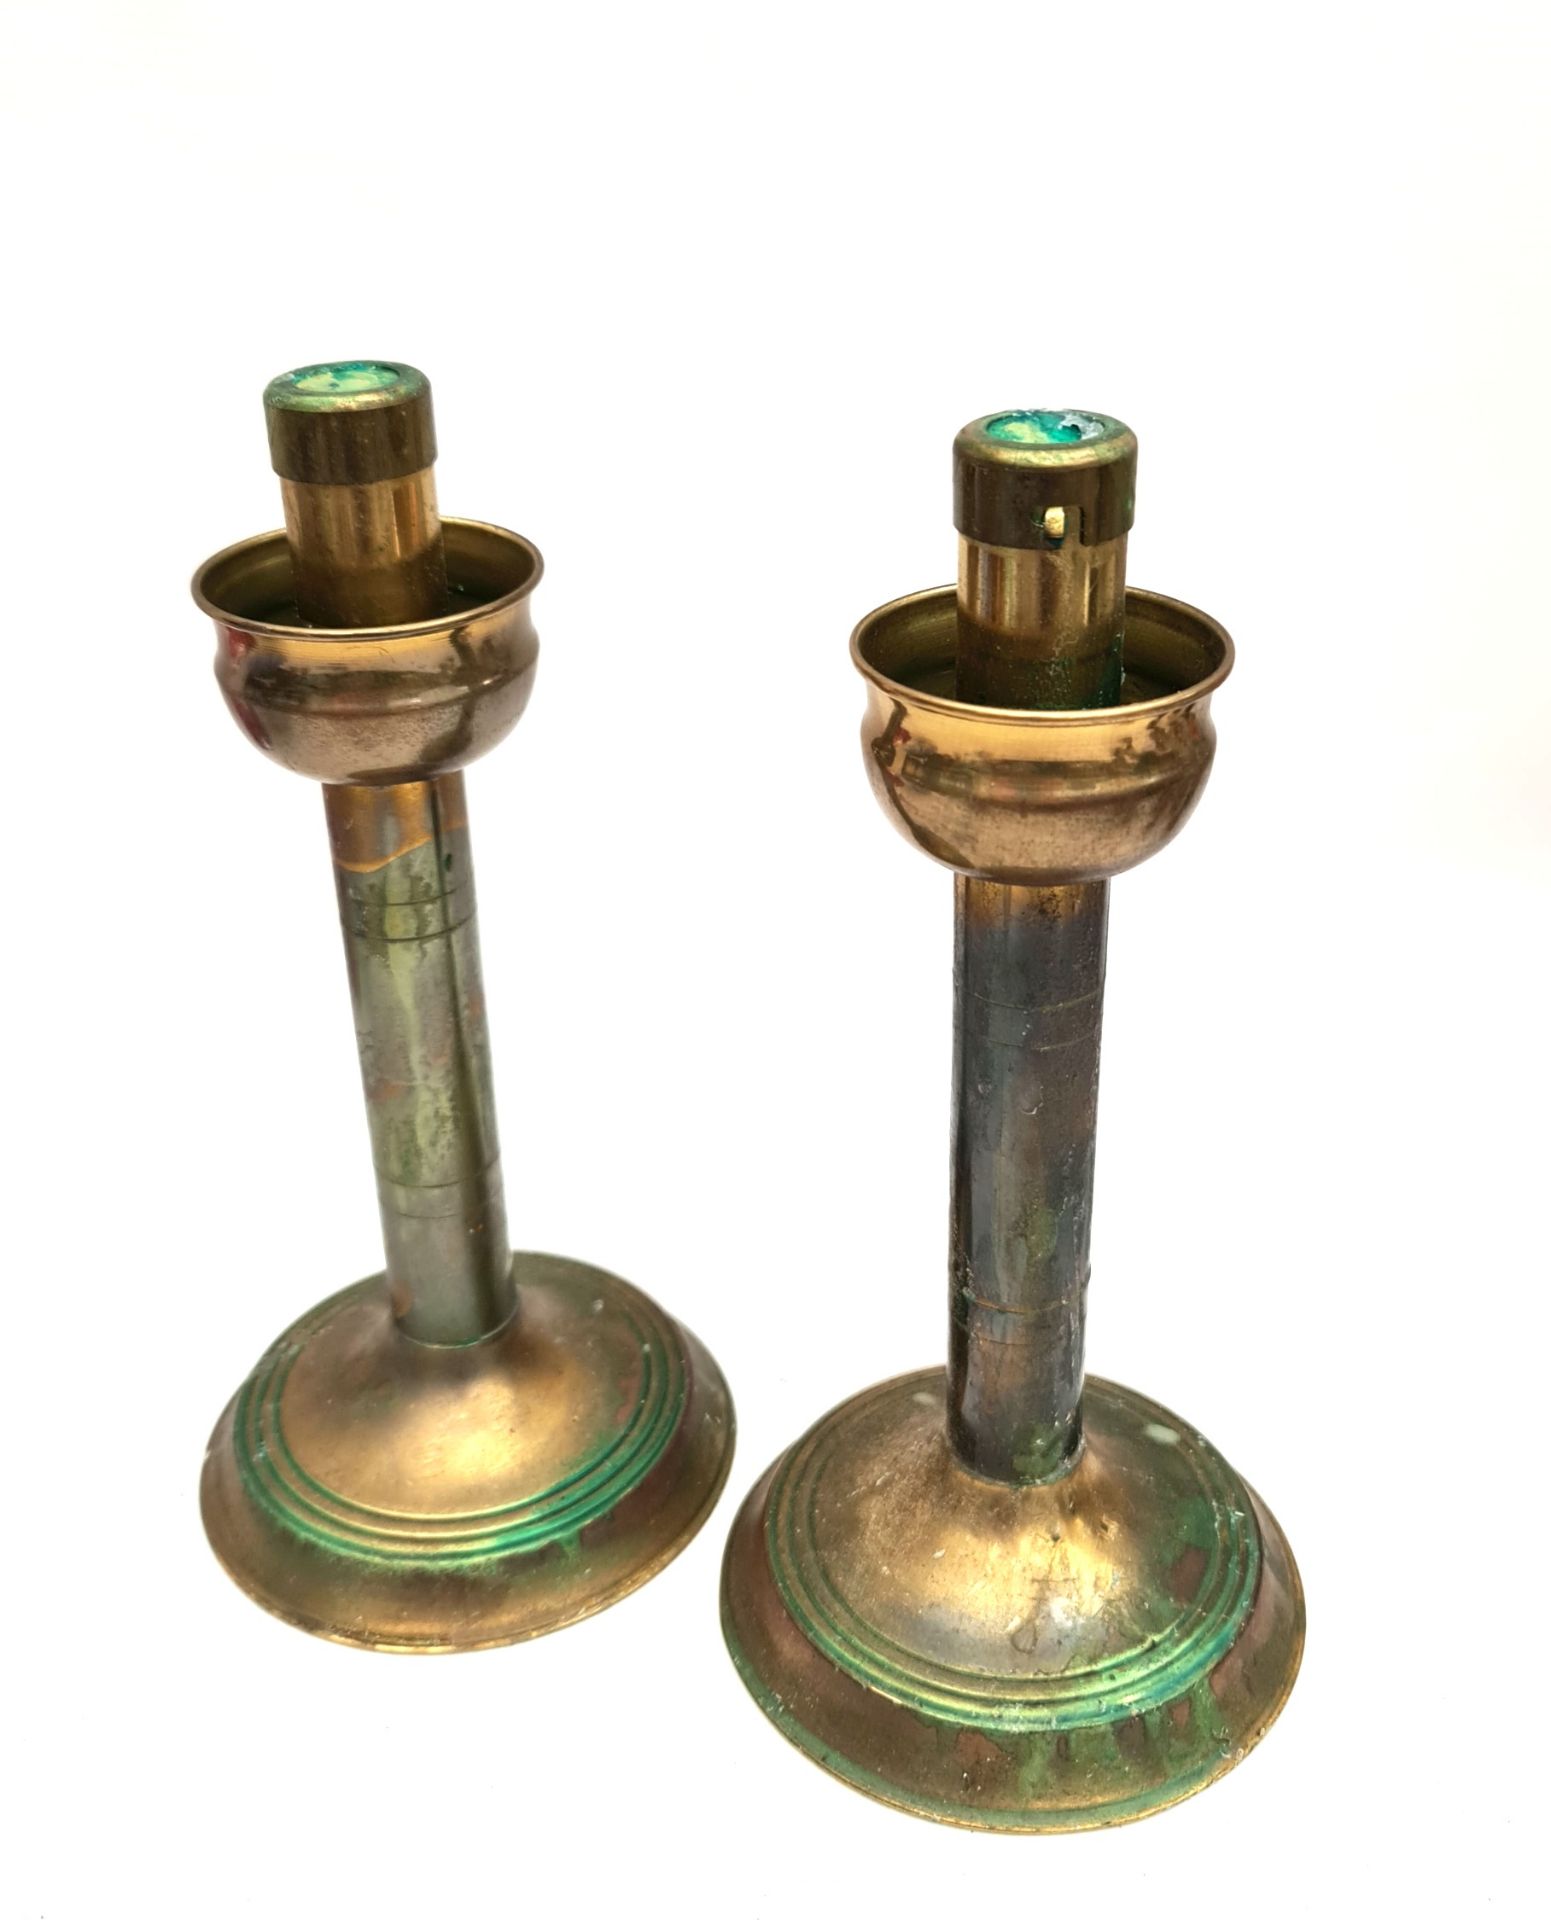 Pair of Brass Candlesticks 9 inches tall . Pair of Brass Candlesticks 9 inches tall.Part of a recent